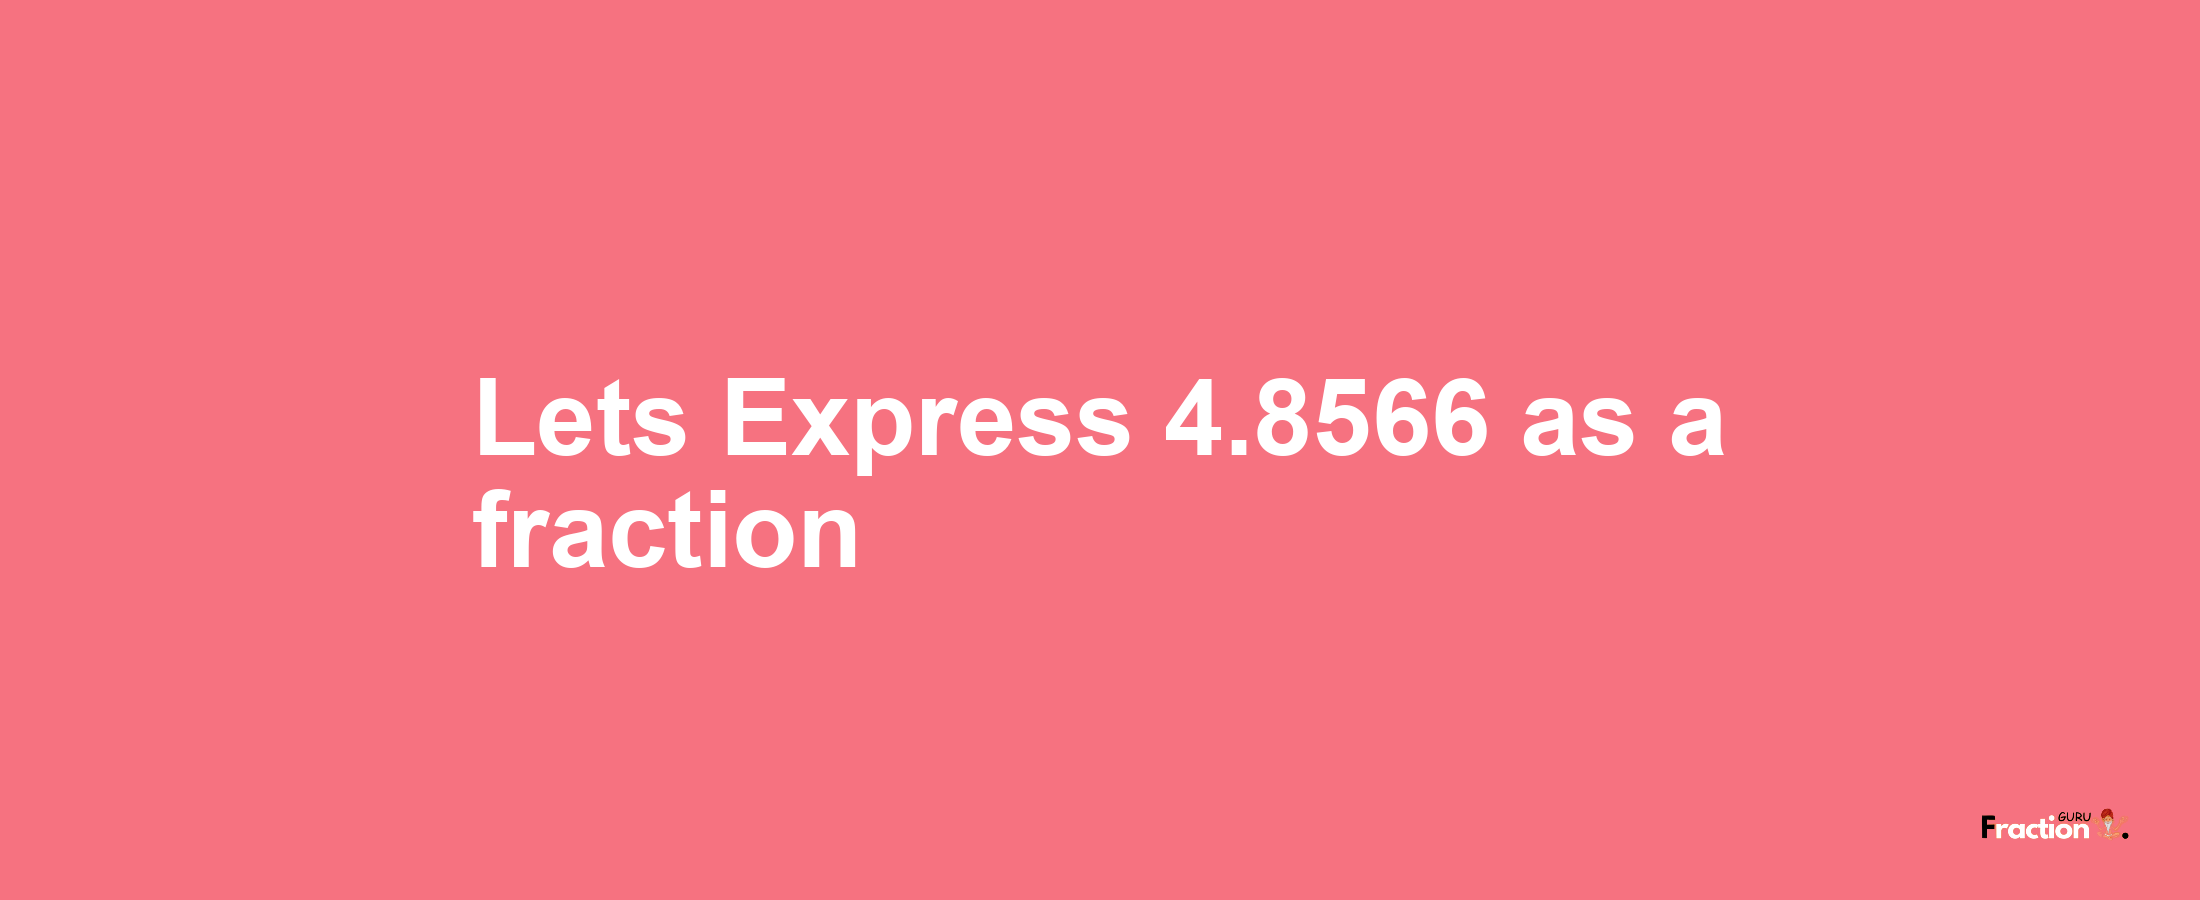 Lets Express 4.8566 as afraction